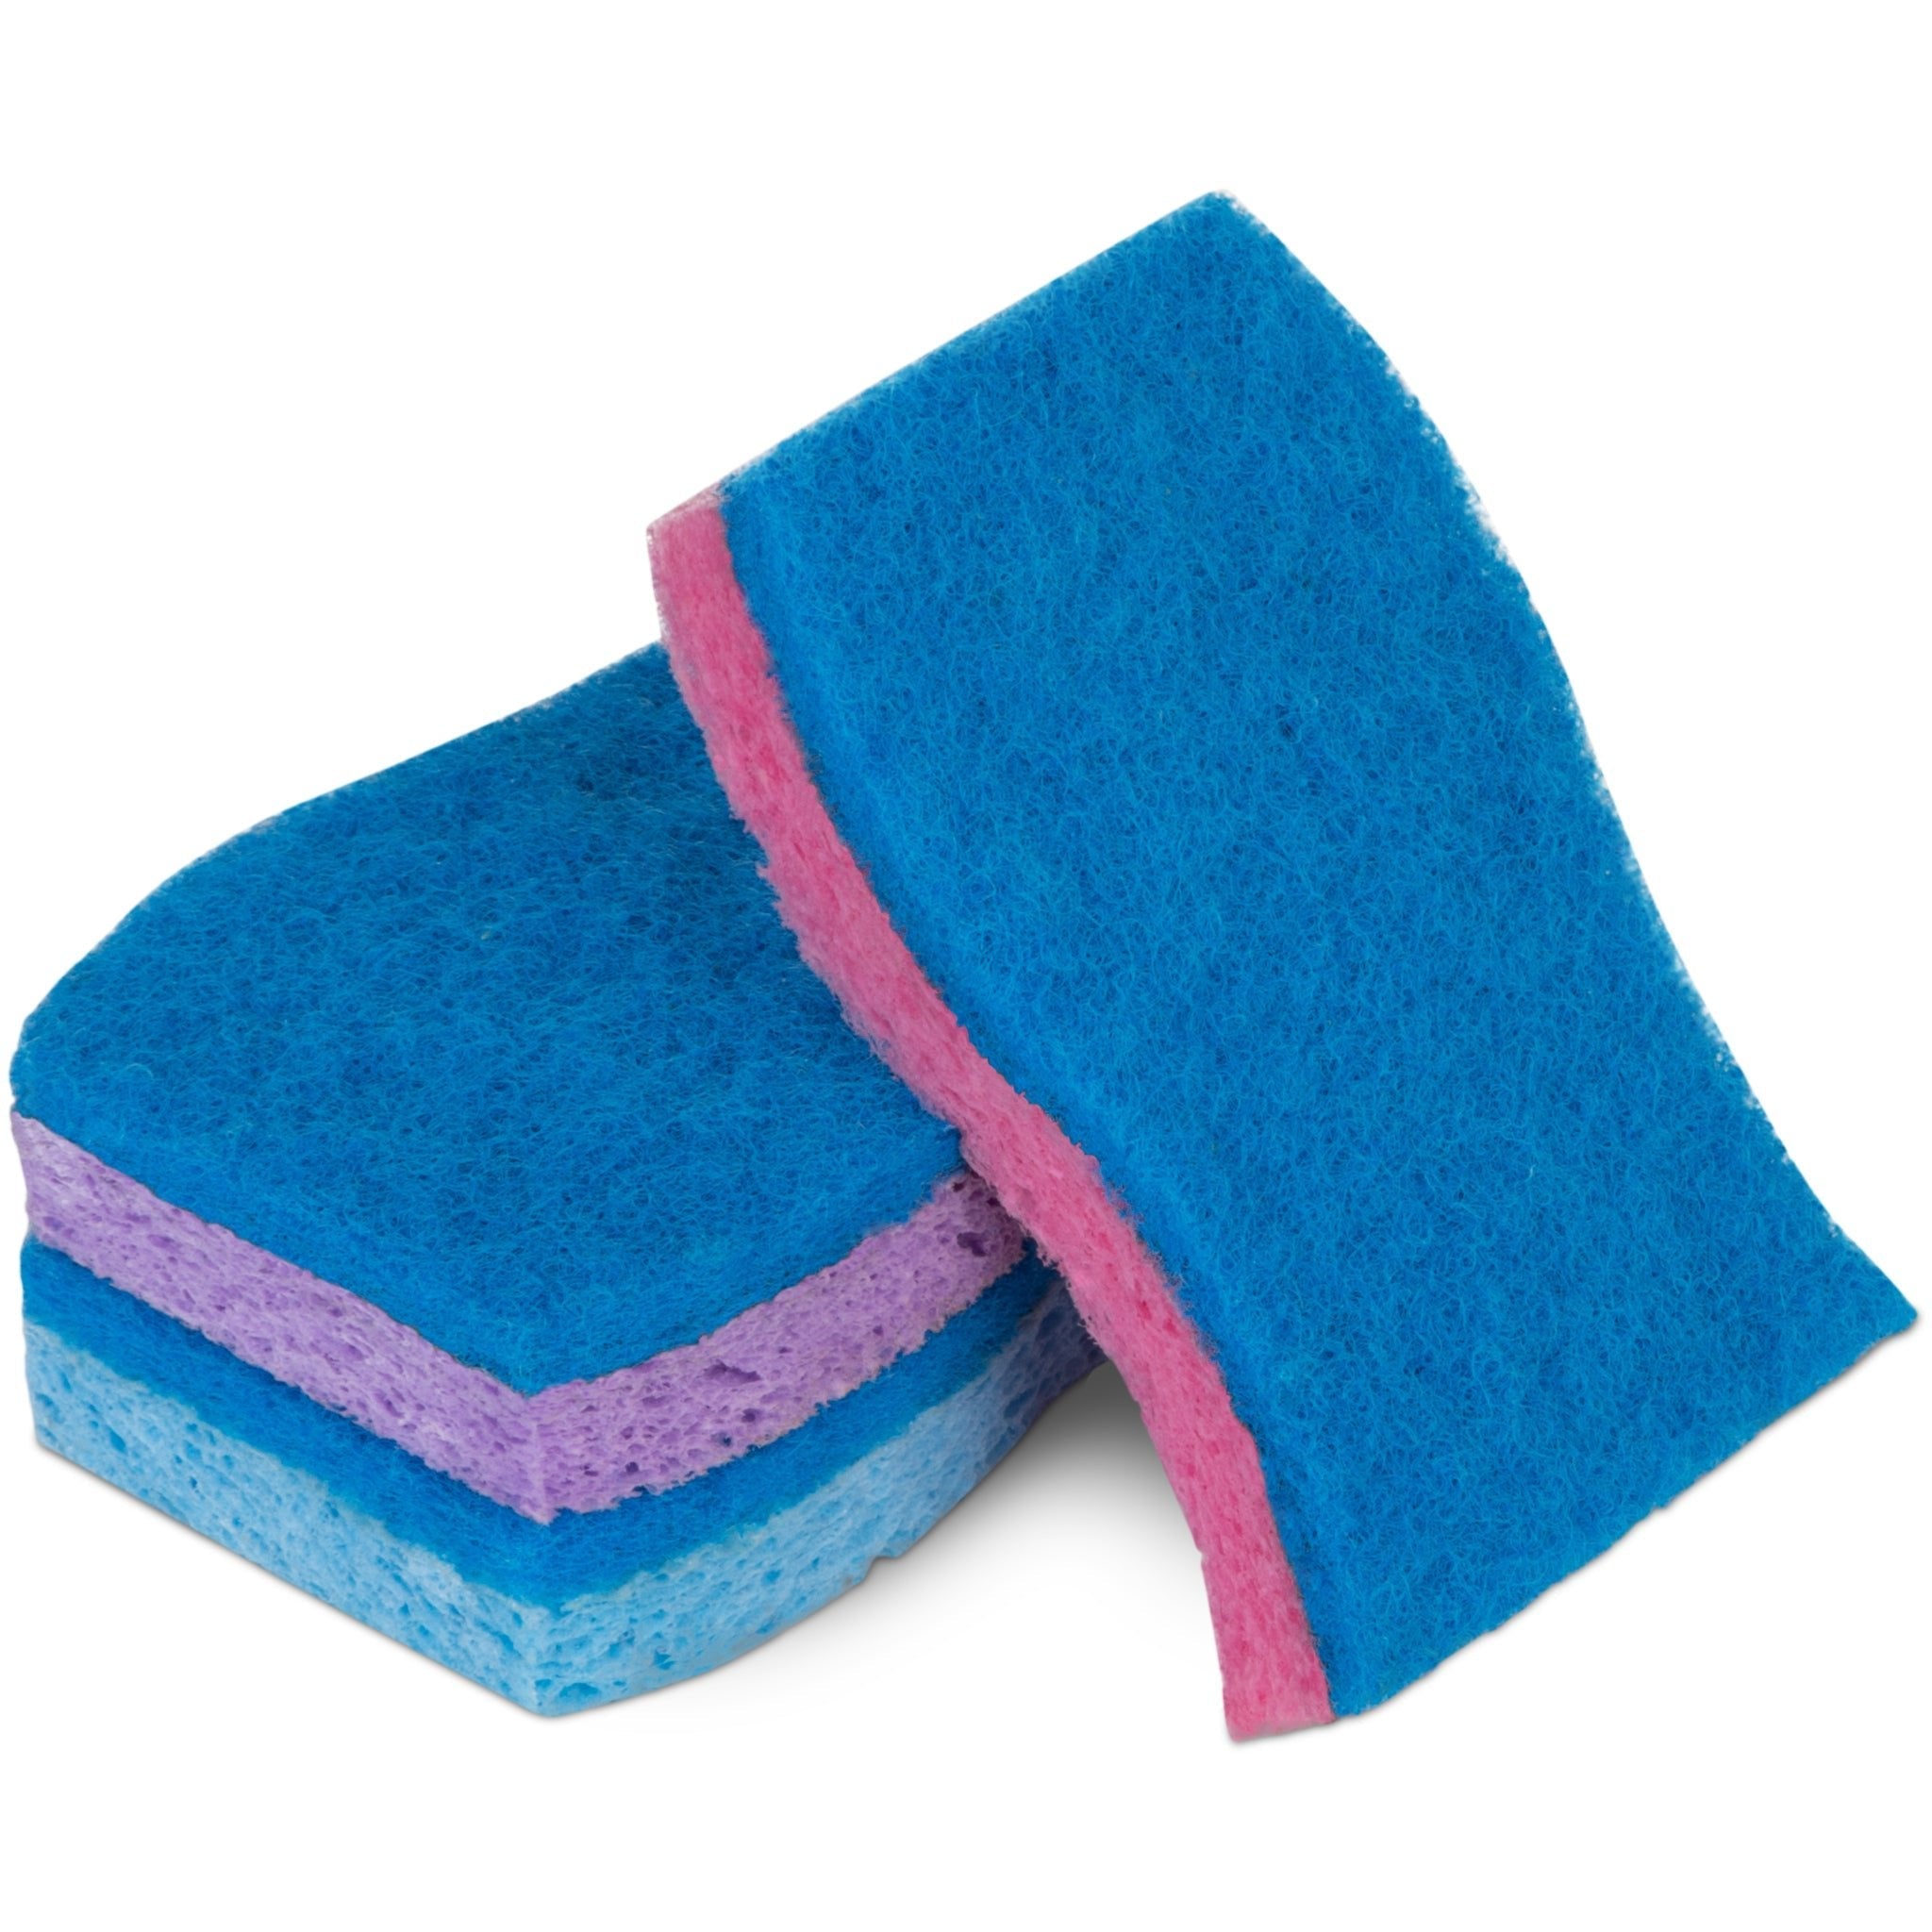 Smart Design Non-Scratch Cellulose Smart Scrub Sponge - Set of 9 - Ultra Absorbent - Ergonomic Shape - Cleaning, Dishes, & Hard Stains - Blue